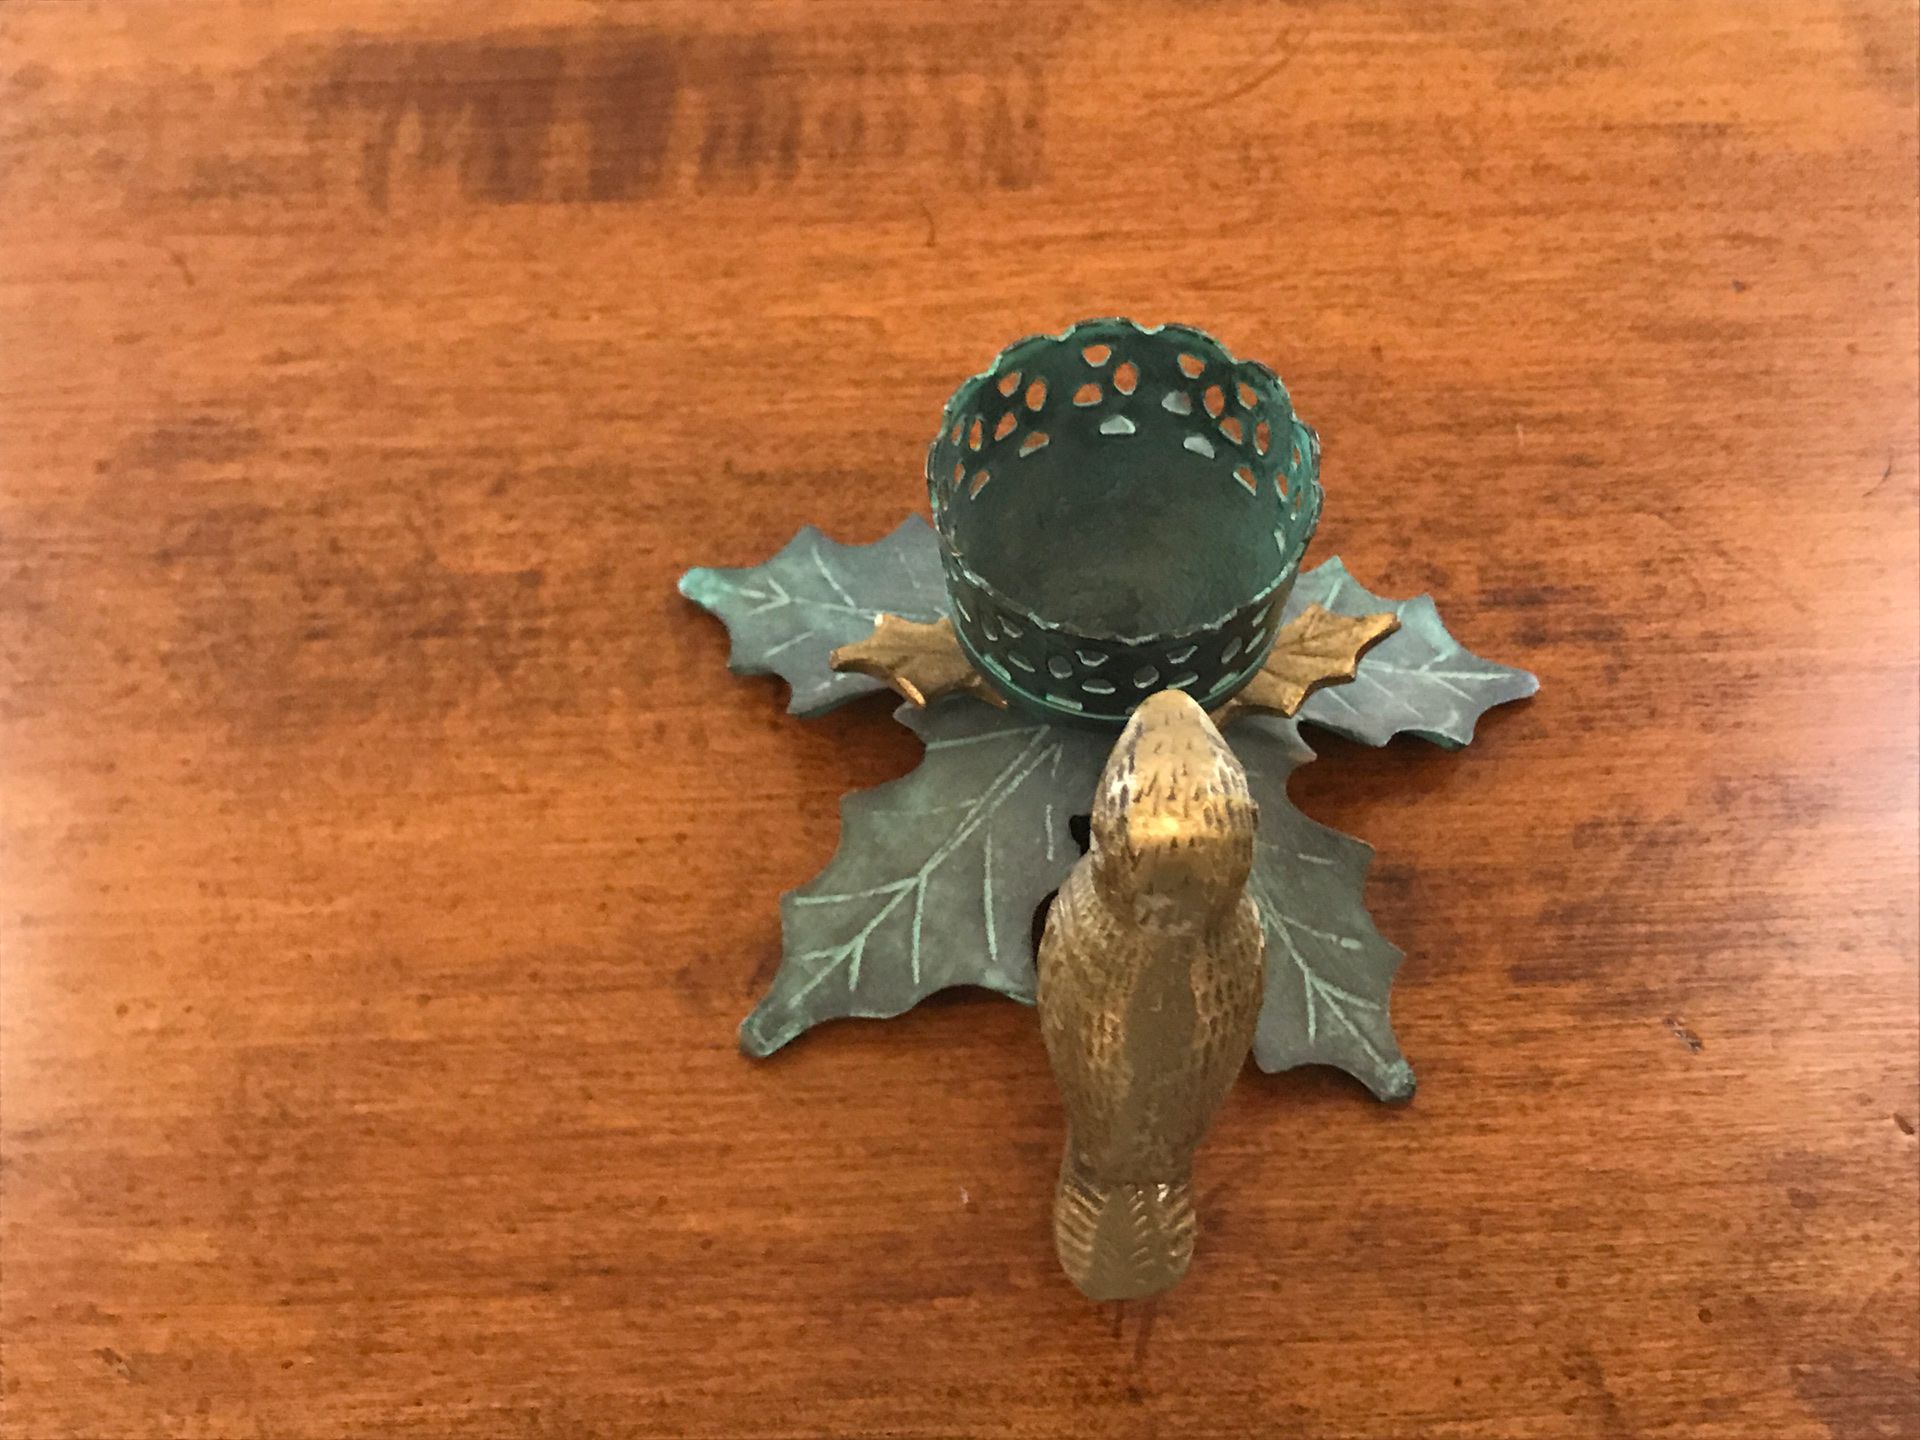 Brass bird candle holder flowers are dark green and light green leaves with small gold leaves